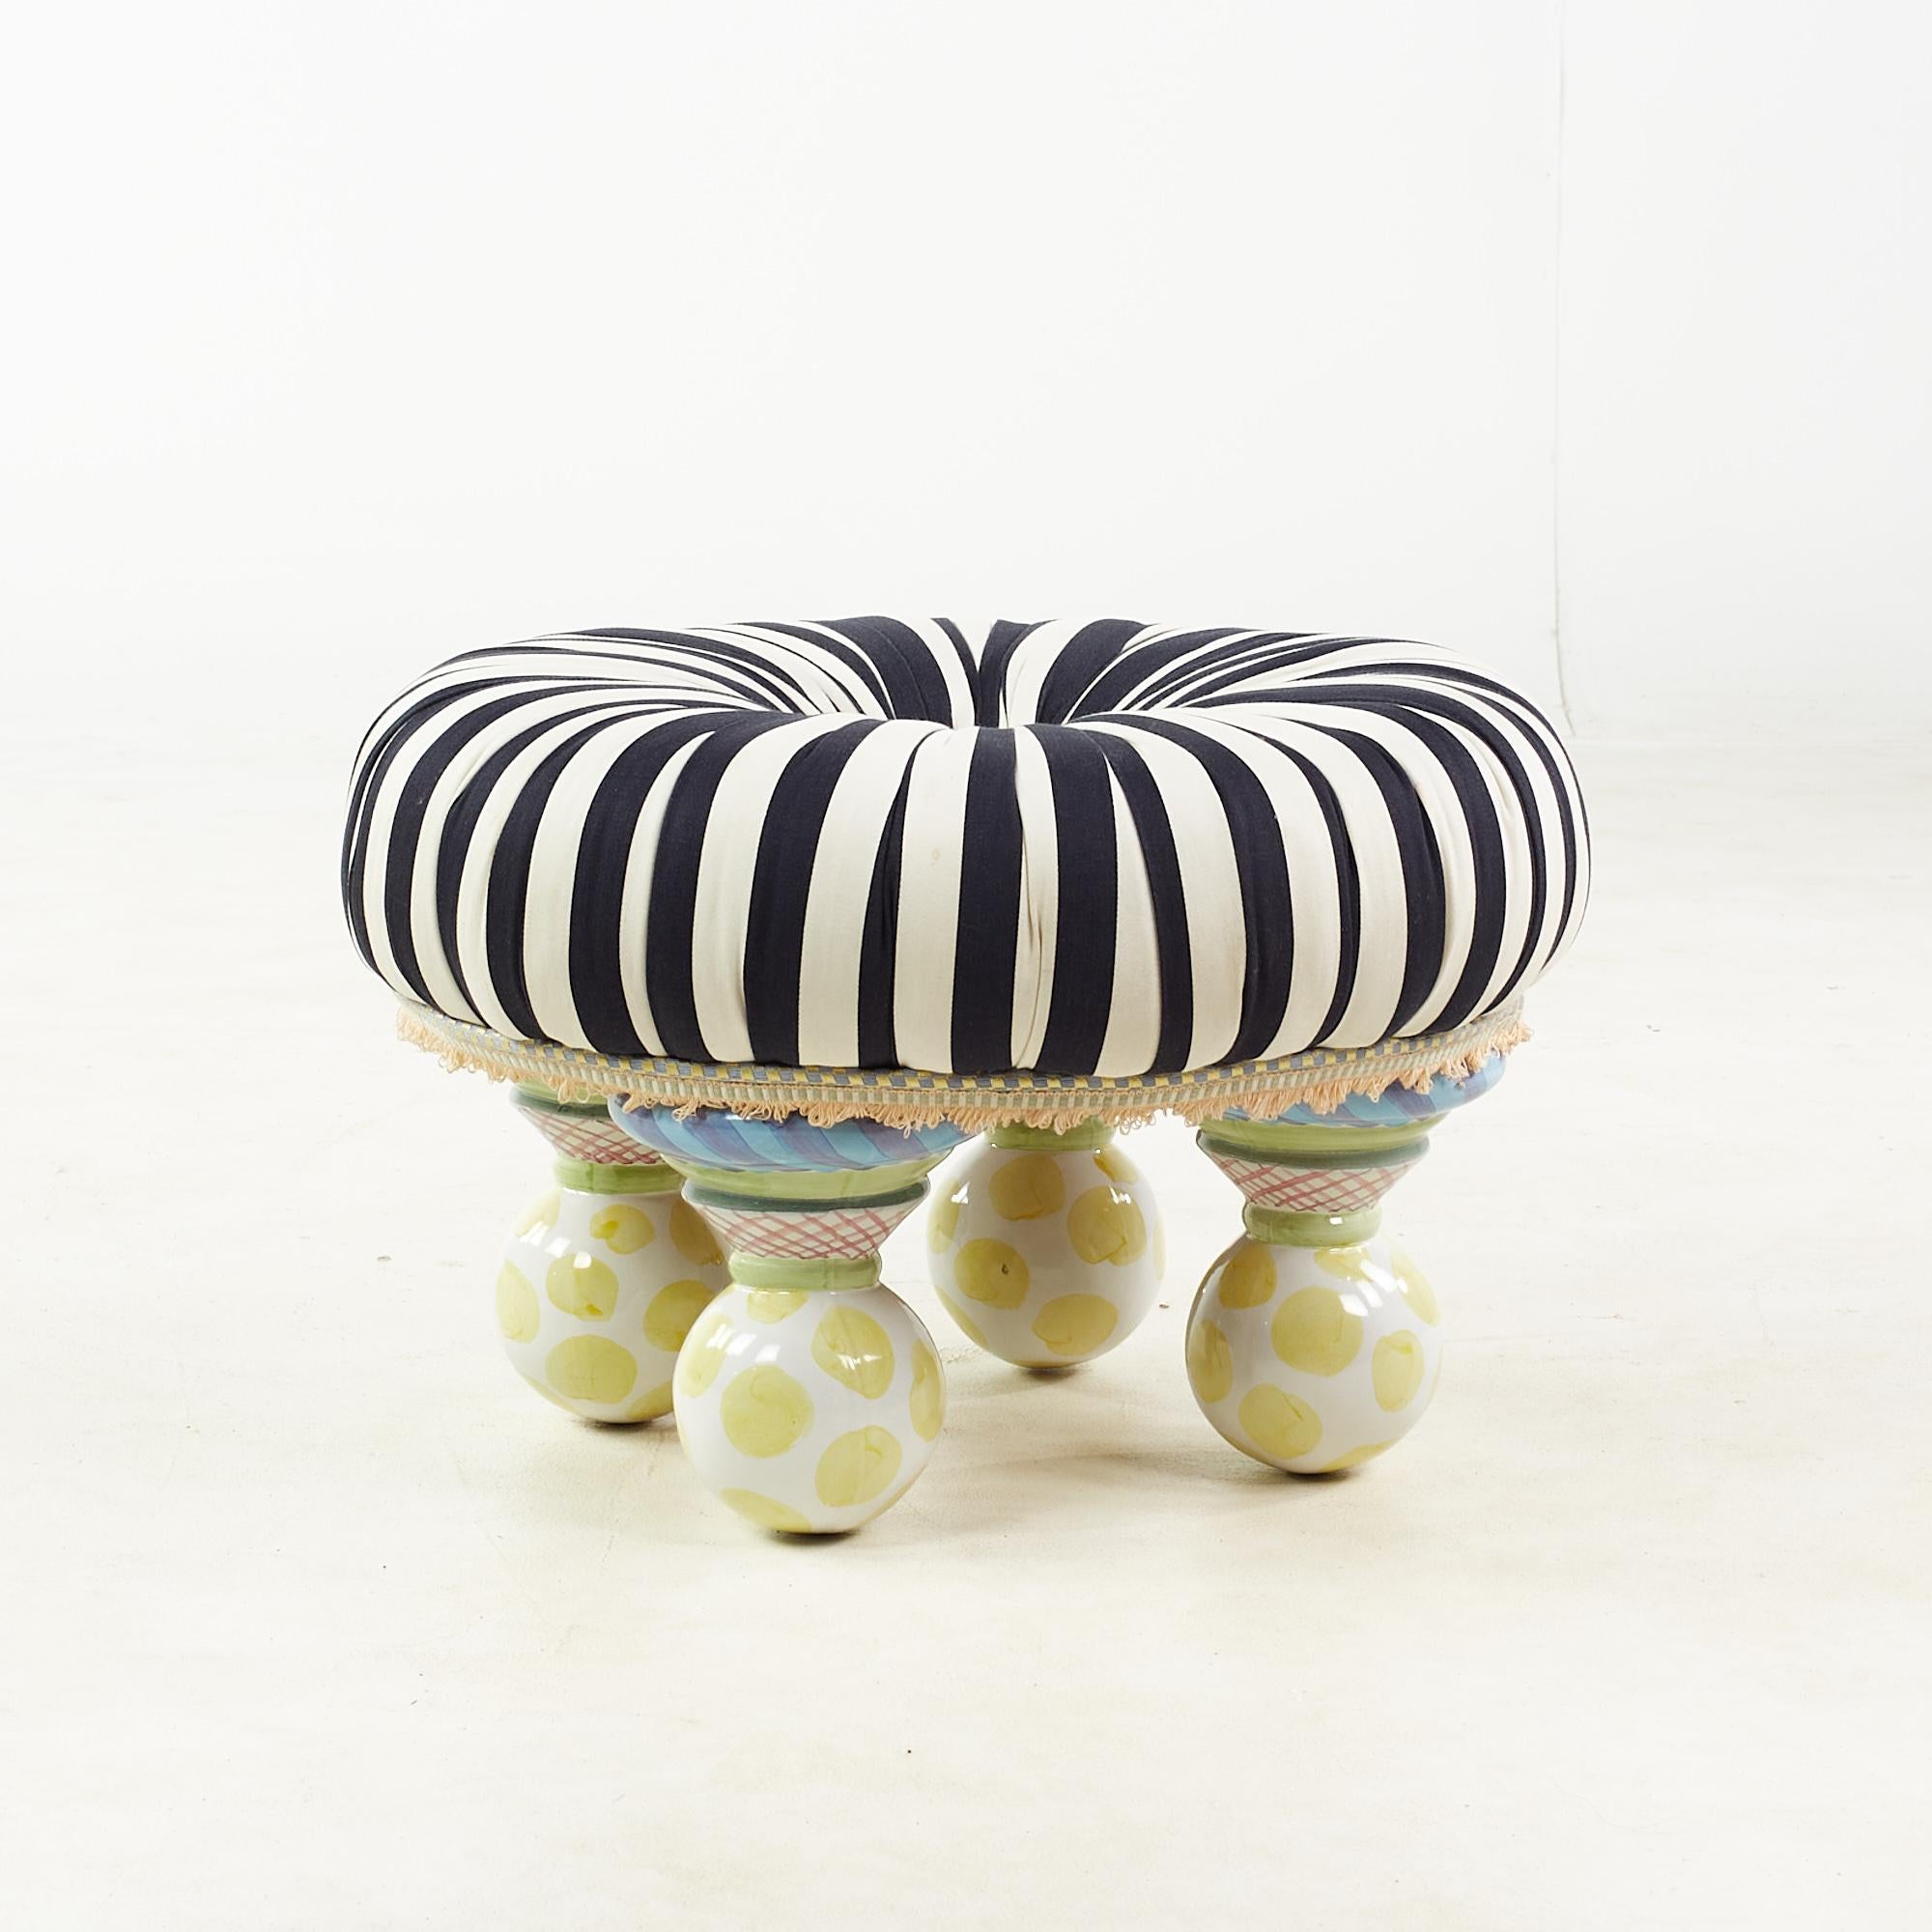 MacKenzie Childs Contemporary Ottoman with Hand Painted Porcelain Legs 2